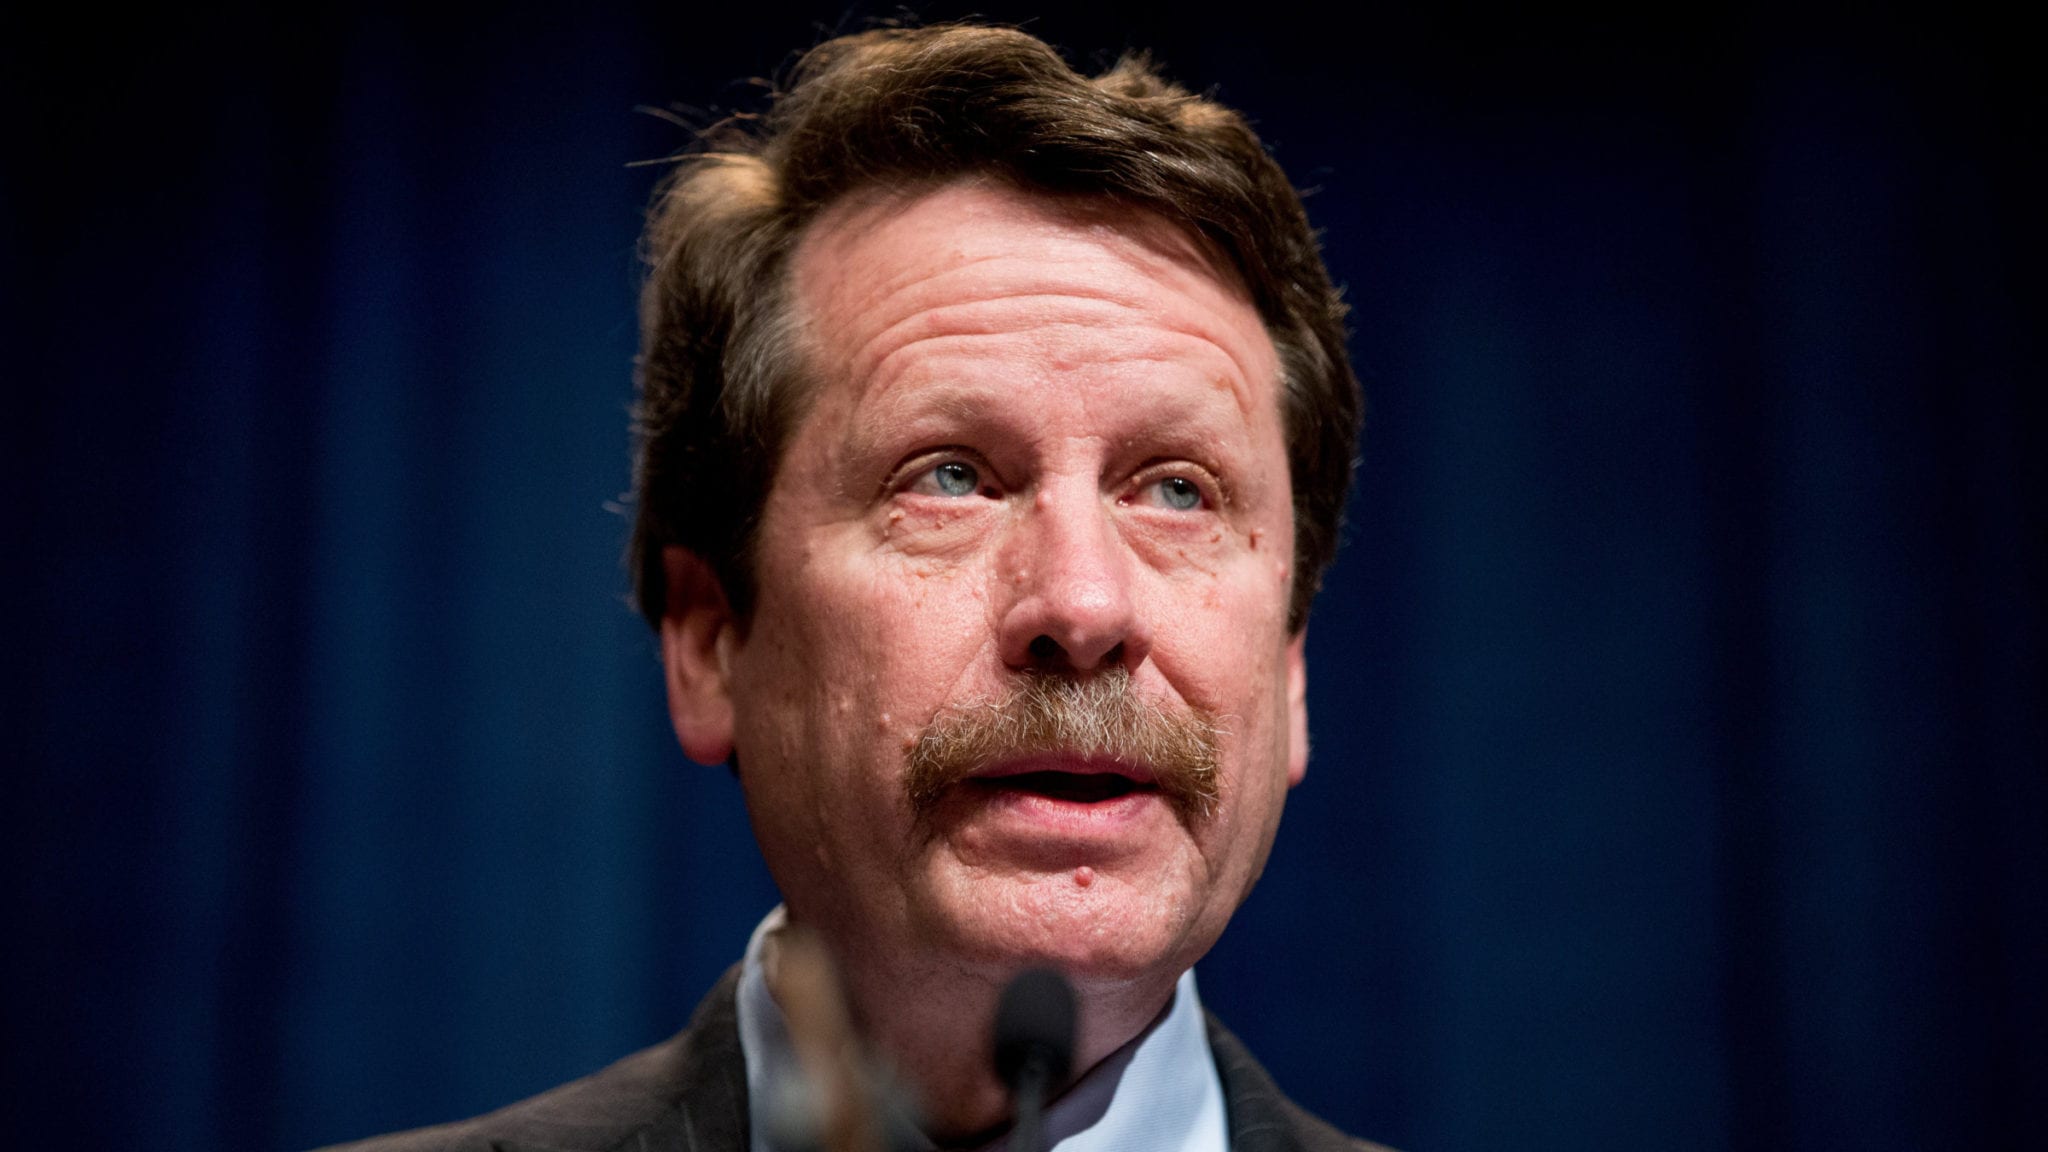 Does biopharma support the Califf nom for FDA? Yeah, whatever